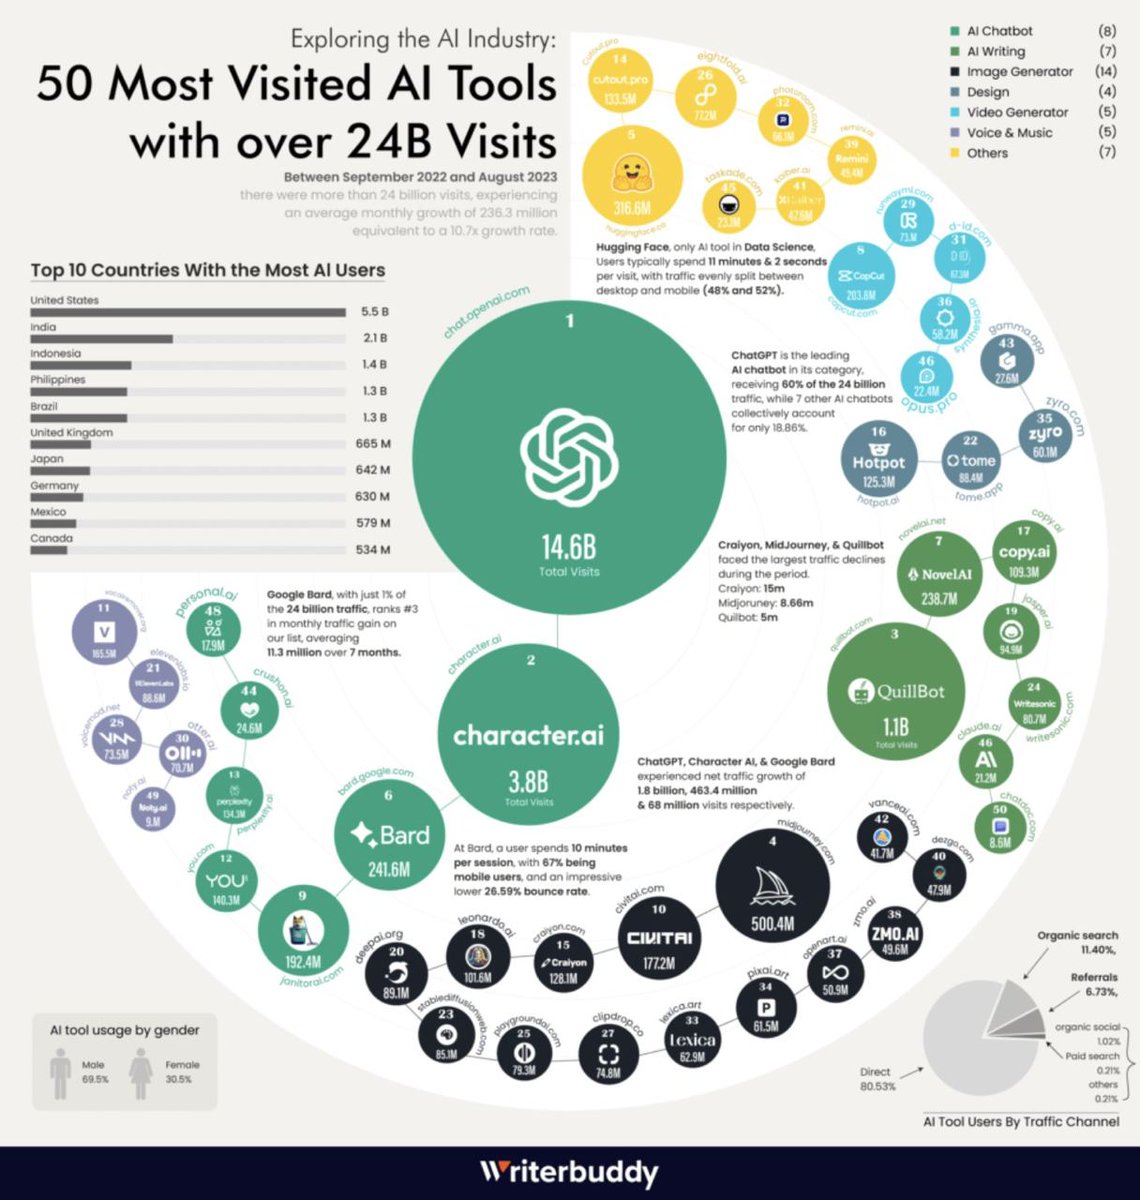 #AIArtwork @AIPunksNFTs @AIToolsClubb @BiteofAI 
#OTDirecto3E 
A new report by Writerbuddy showcased shocking data of the top 50 most visited AI tools between September 2022 and August 2023.

Using scraped data from AI directories and SEMrush, the report showcased 10.7x AI tool